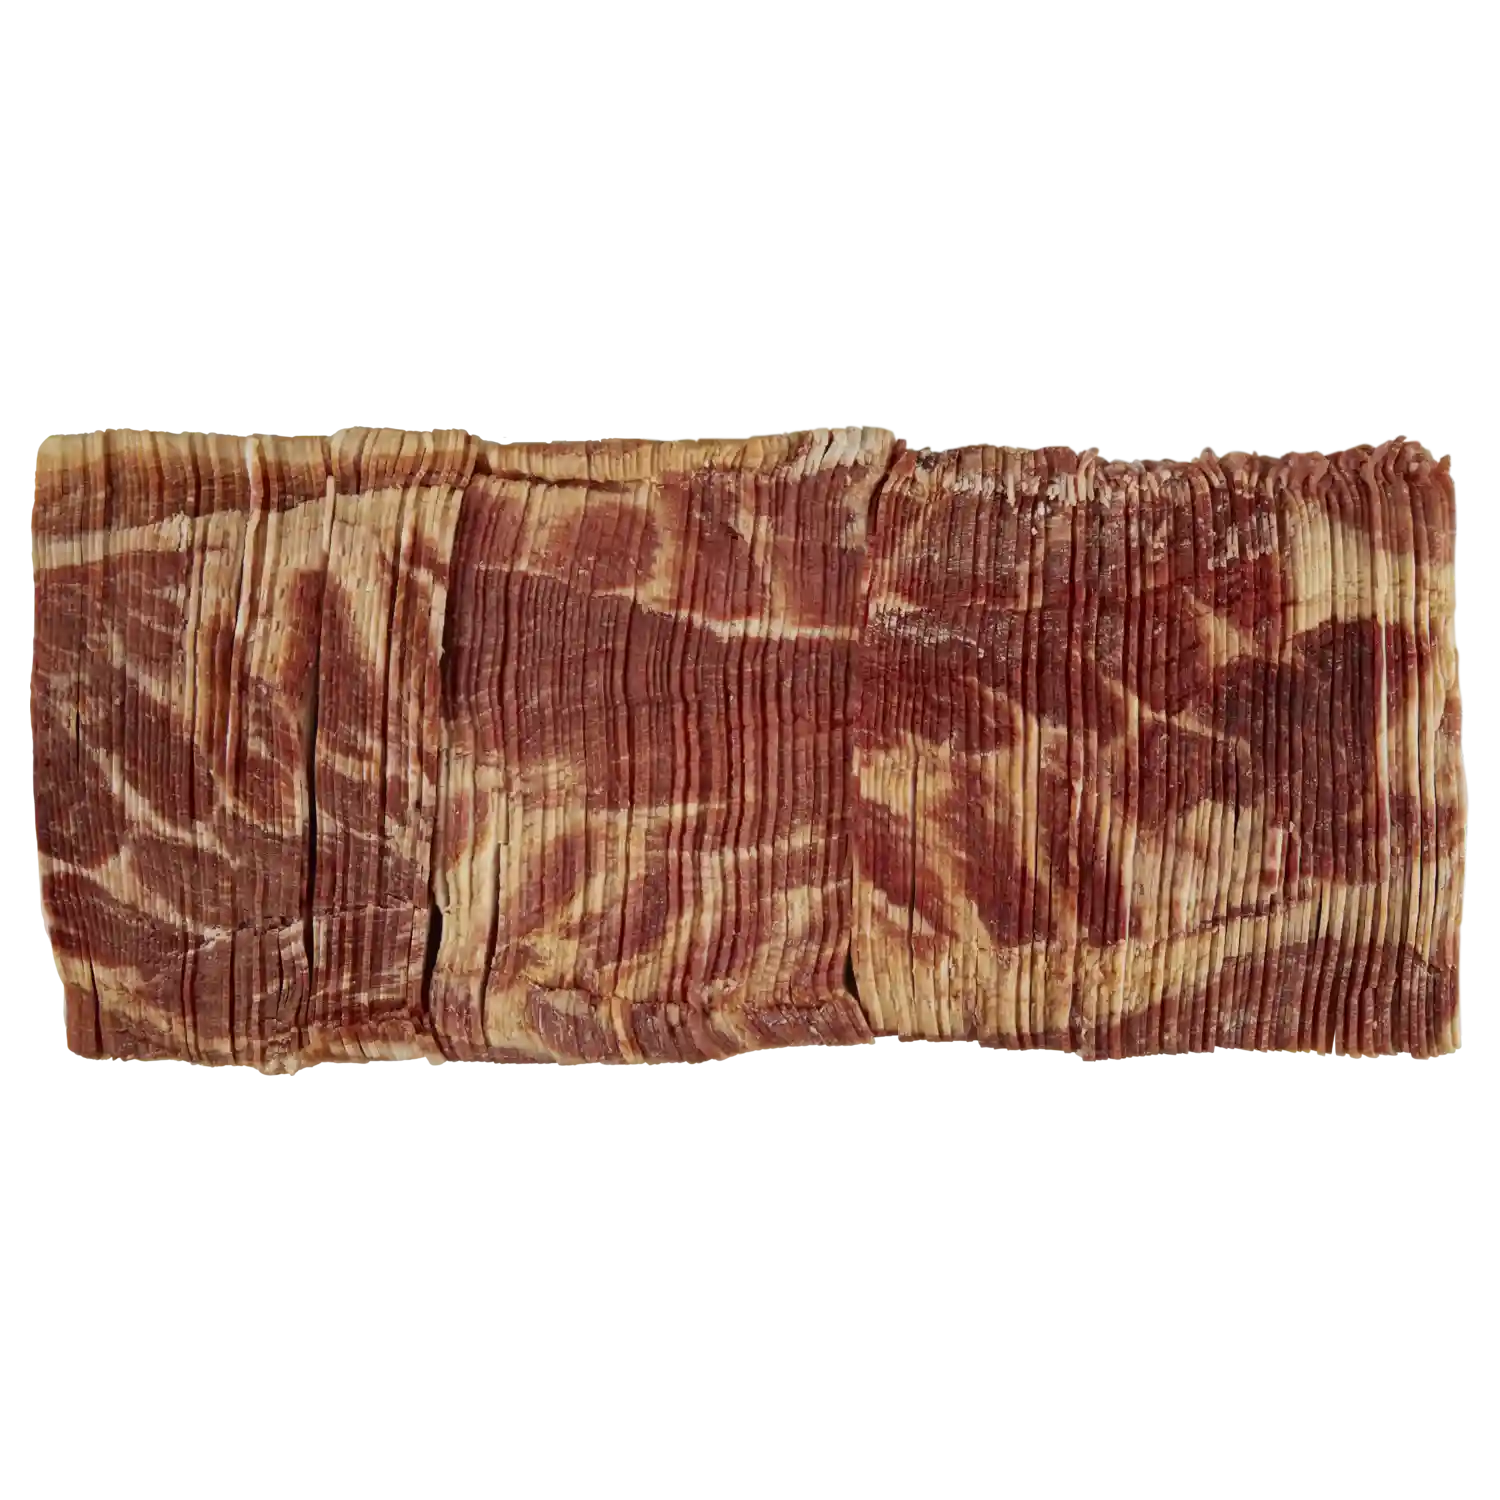 Wright® Brand Naturally Hickory Smoked Regular Sliced Bacon, Bulk, 33 Lbs, 6 Slices/Inch, Frozen_image_31